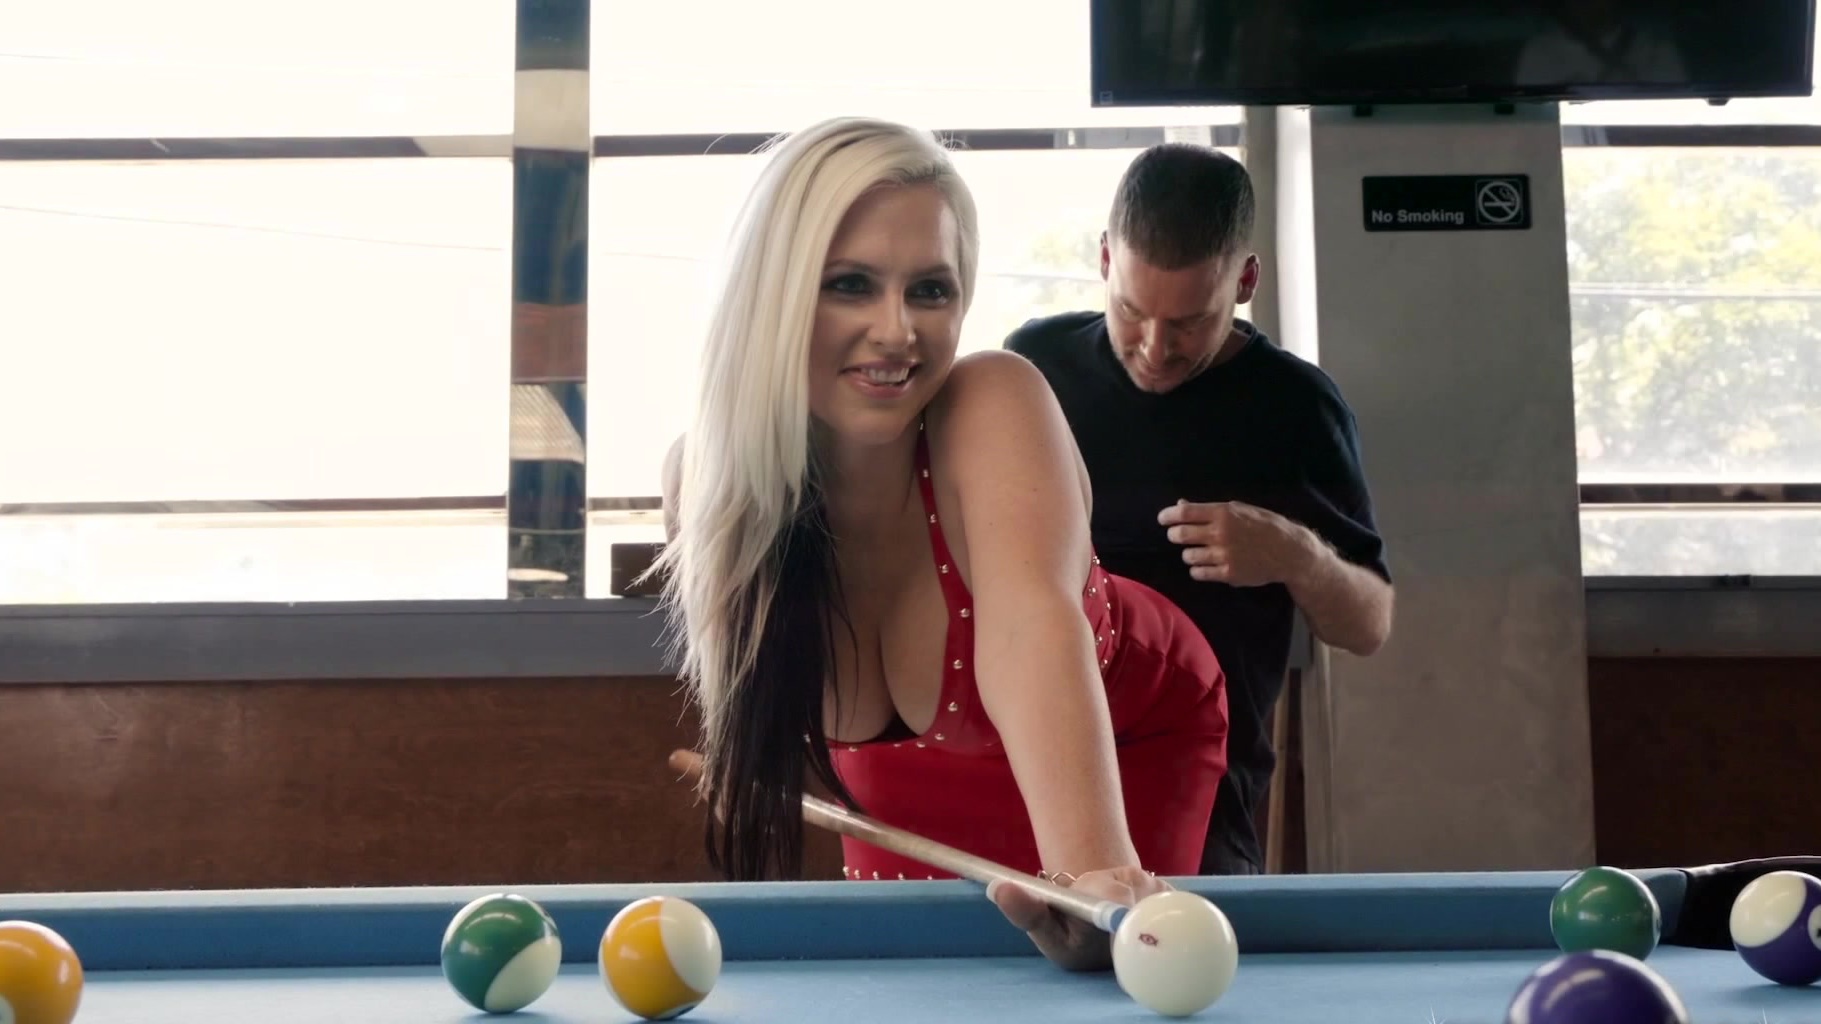 Bent over pool table